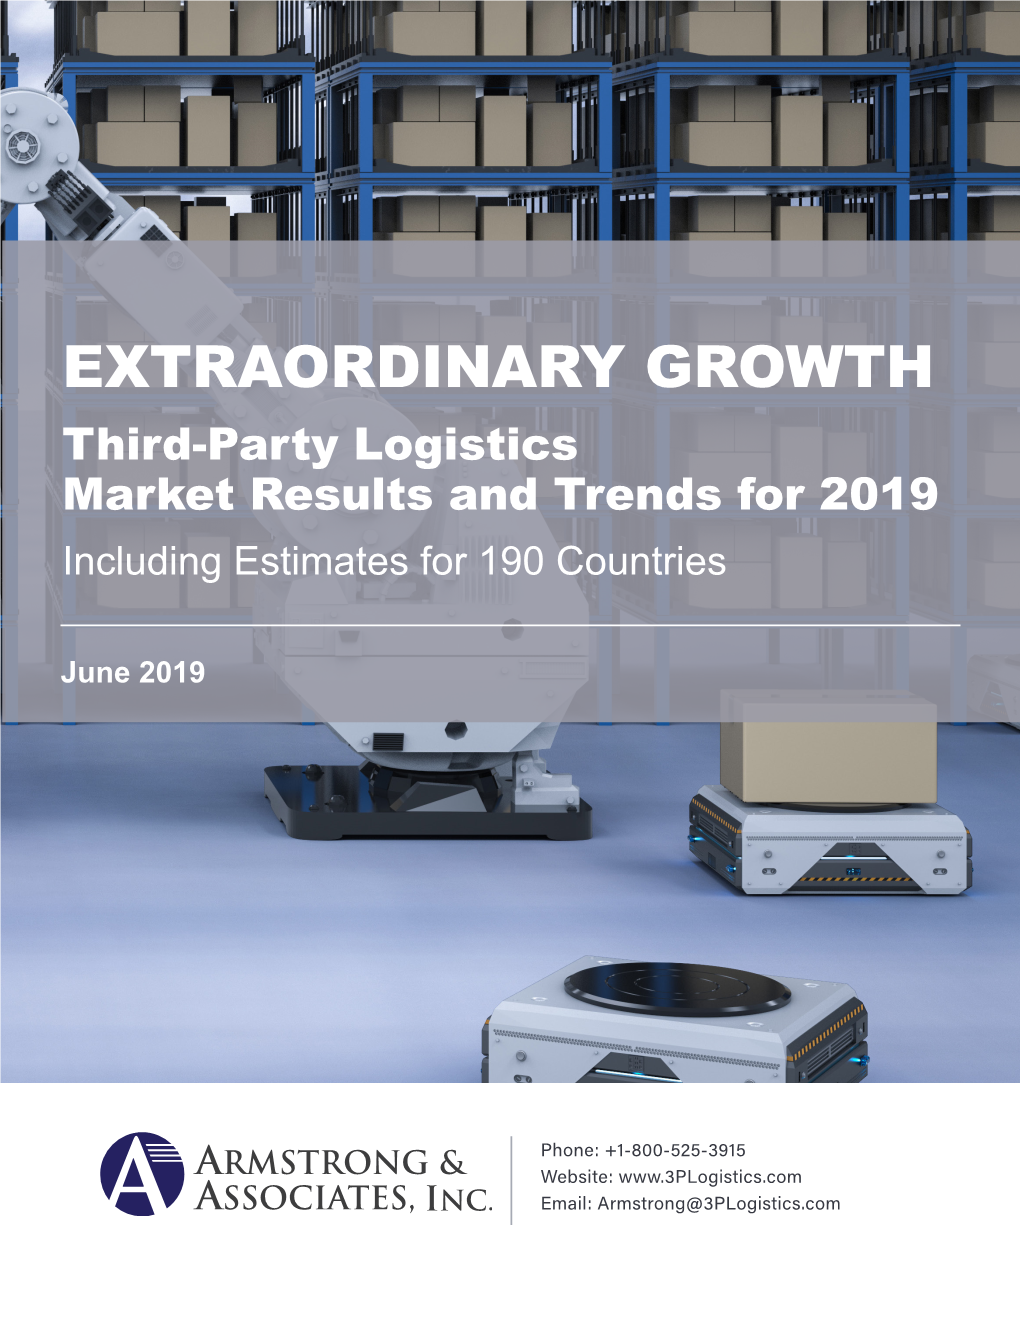 EXTRAORDINARY GROWTH Third-Party Logistics Market Results and Trends for 2019 Including Estimates for 190 Countries